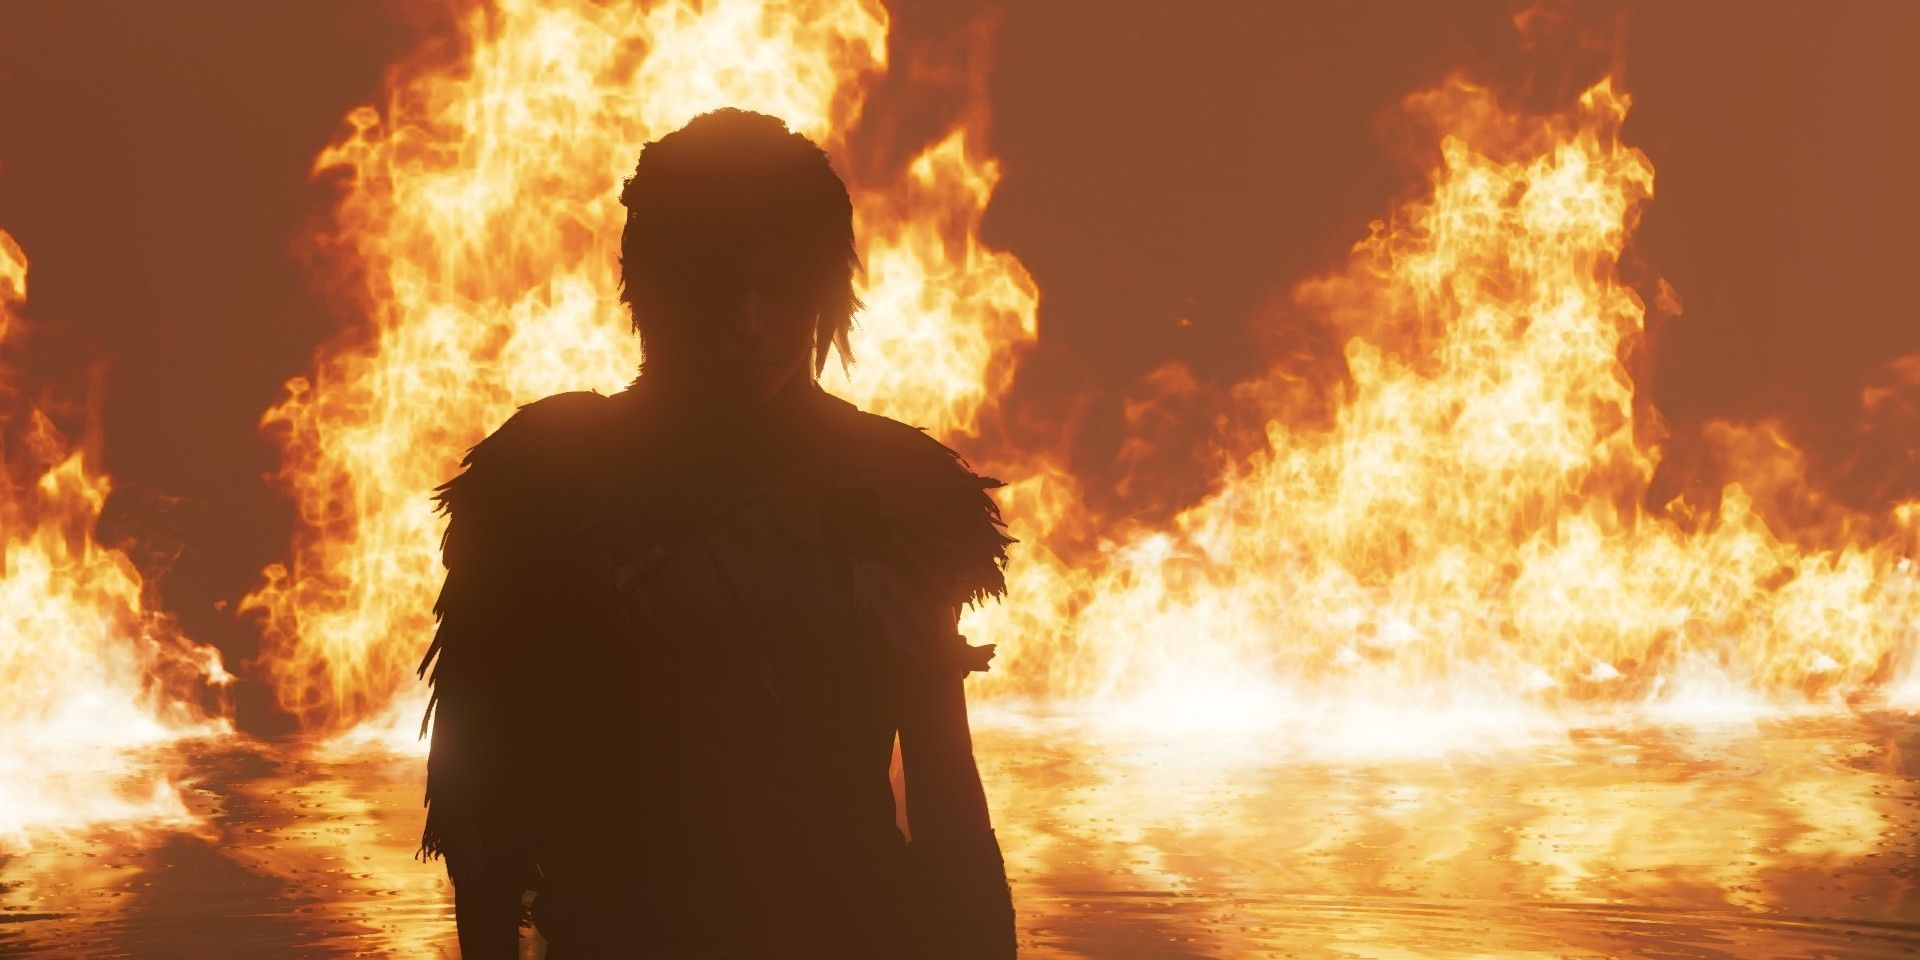 A screenshot showing Lara Croft's silhouette in front of burning flames in Shadow of the Tomb Raider